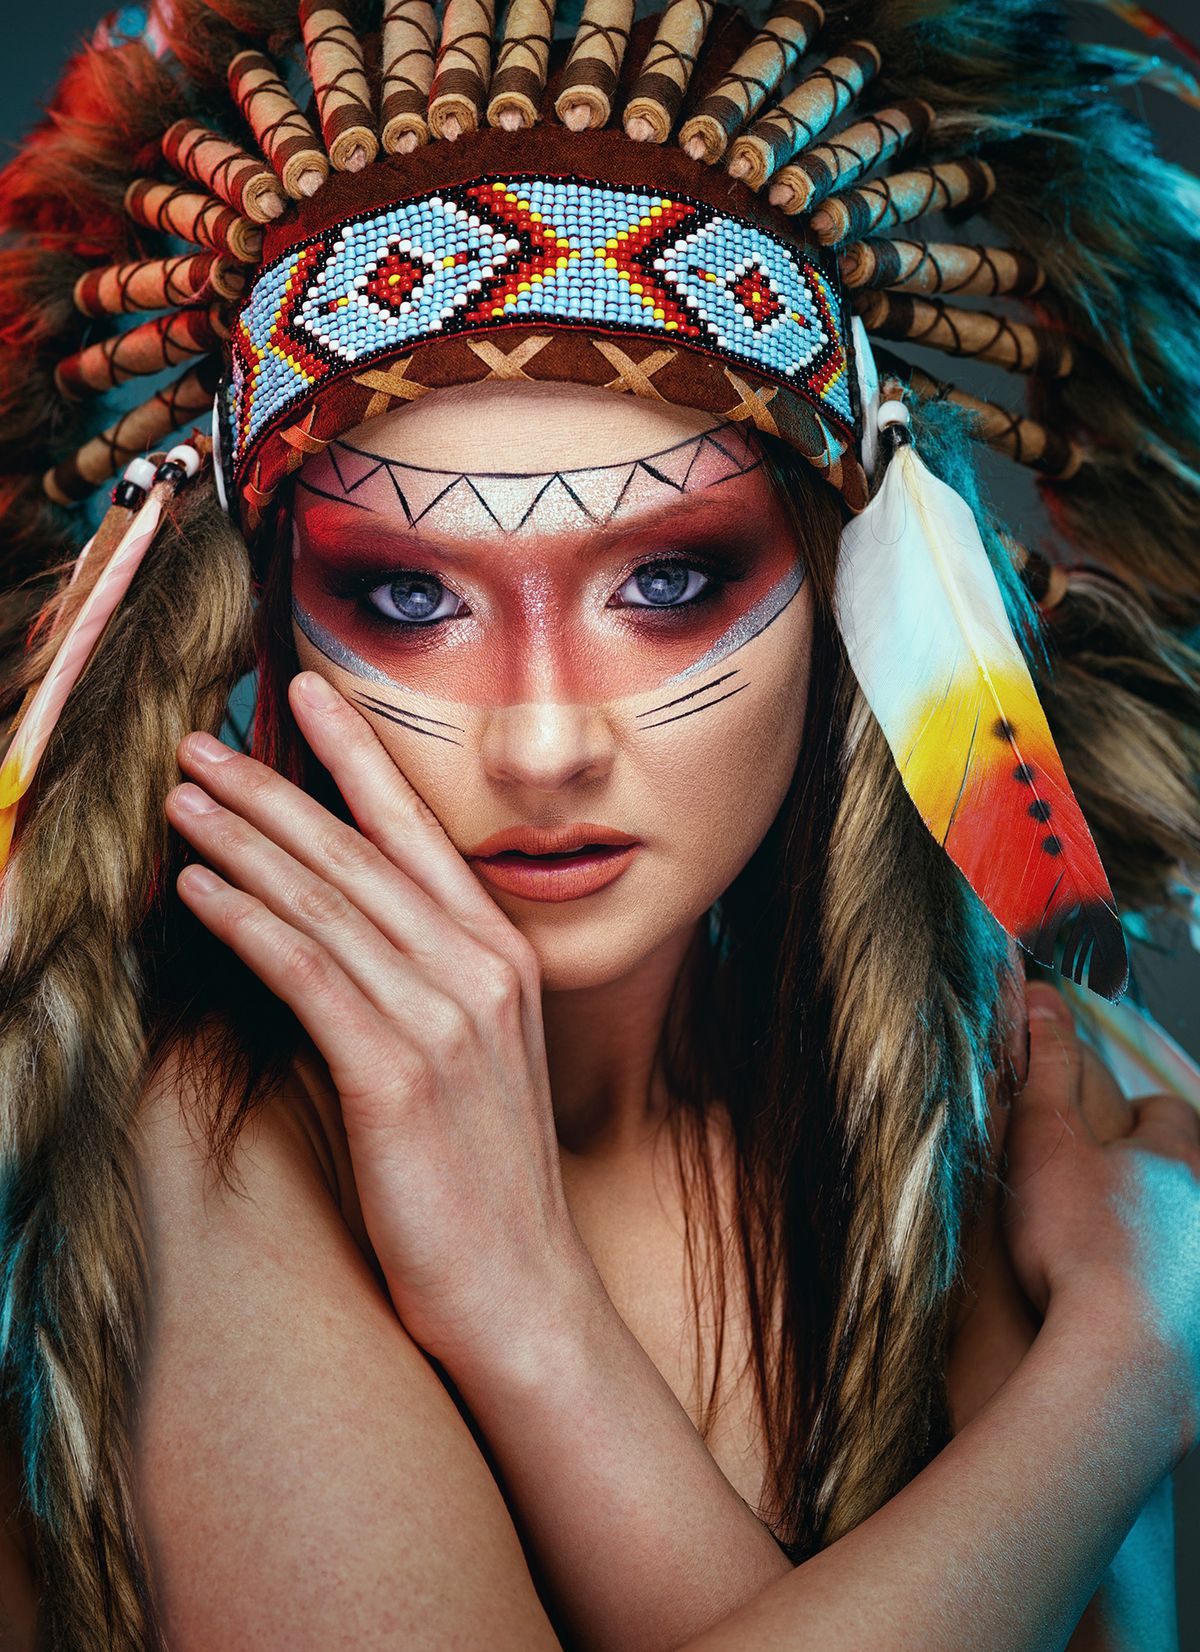 Young,Beautiful,Indian,Female,With,Feather,Headdress